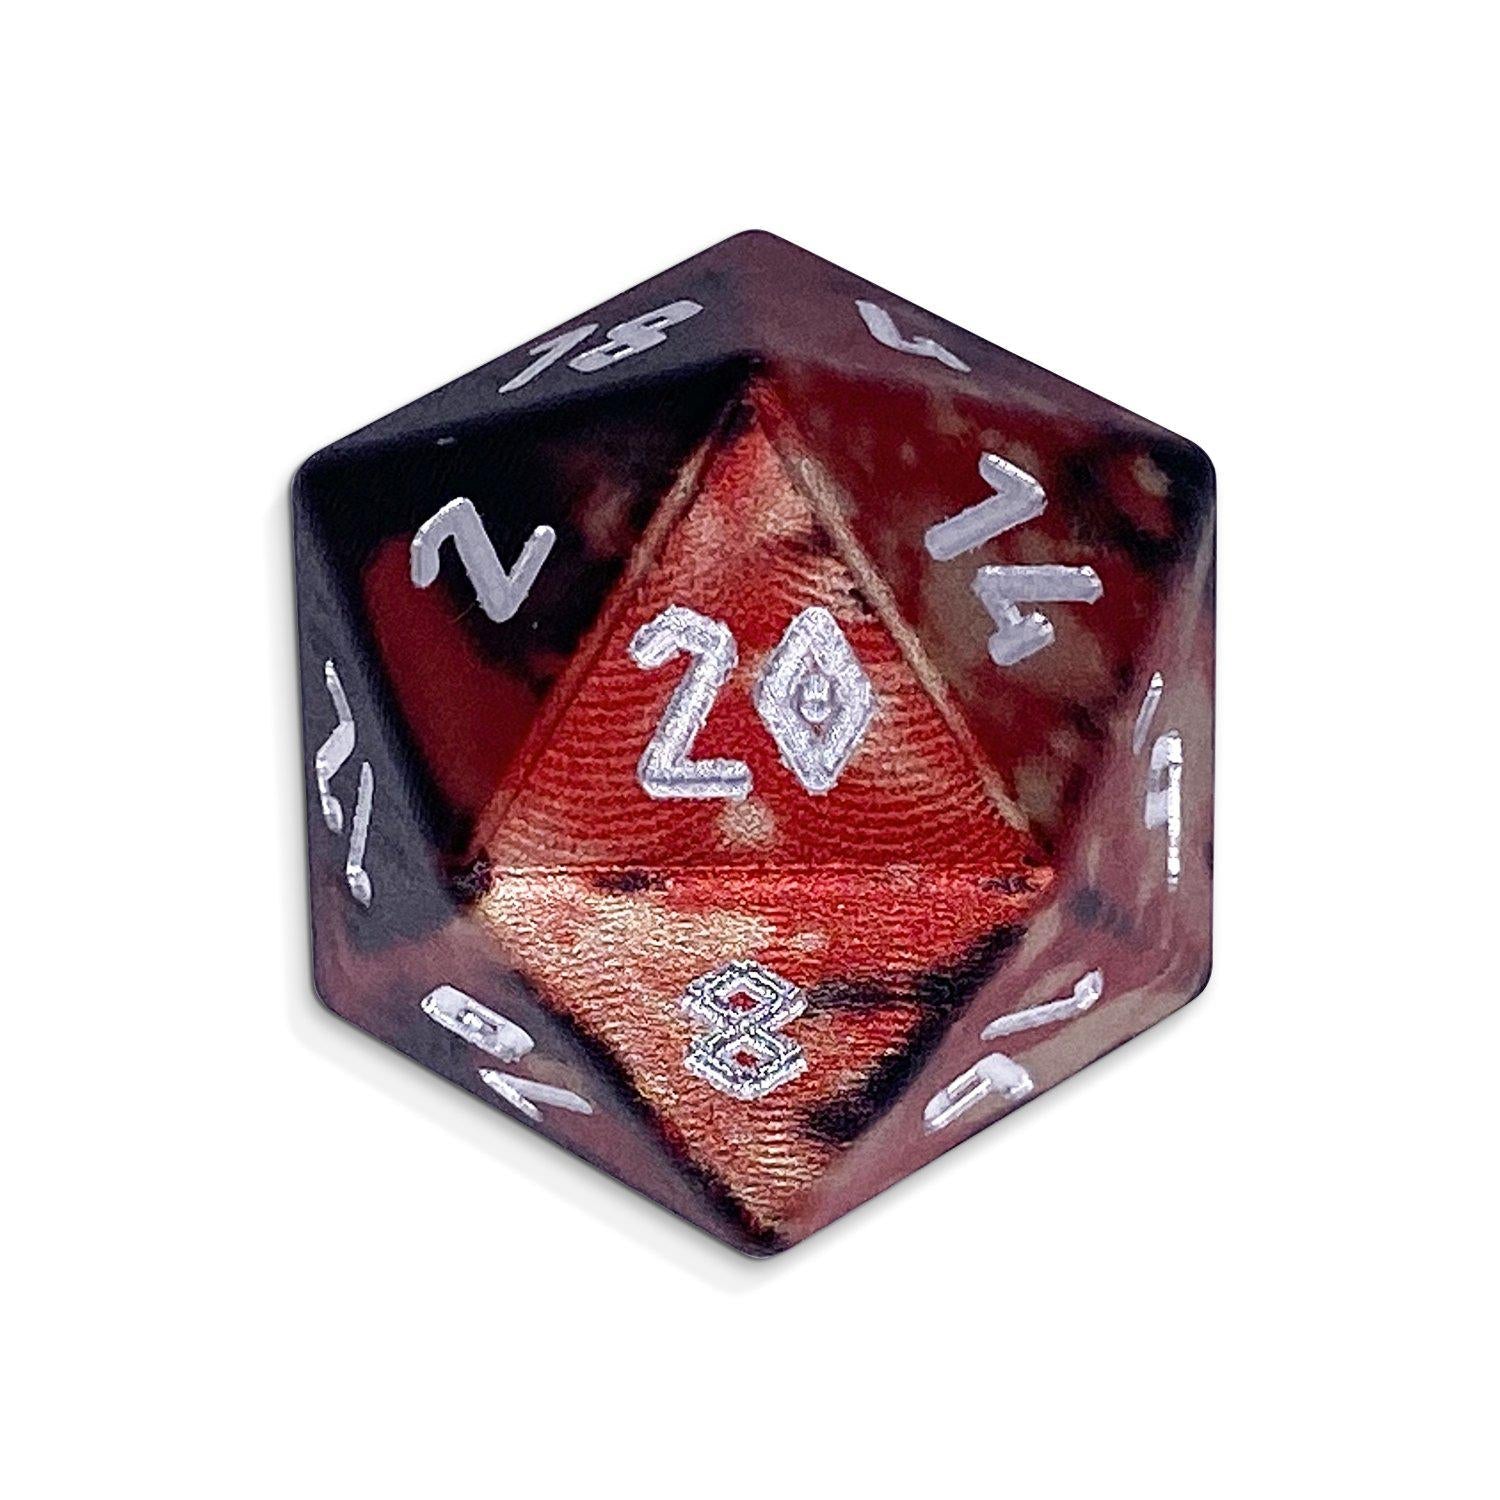 Single Wondrous Dice® D20 in Vampire Lord by Norse Foundry® 6063 Aircraft Grade Aluminum - NOR 02425